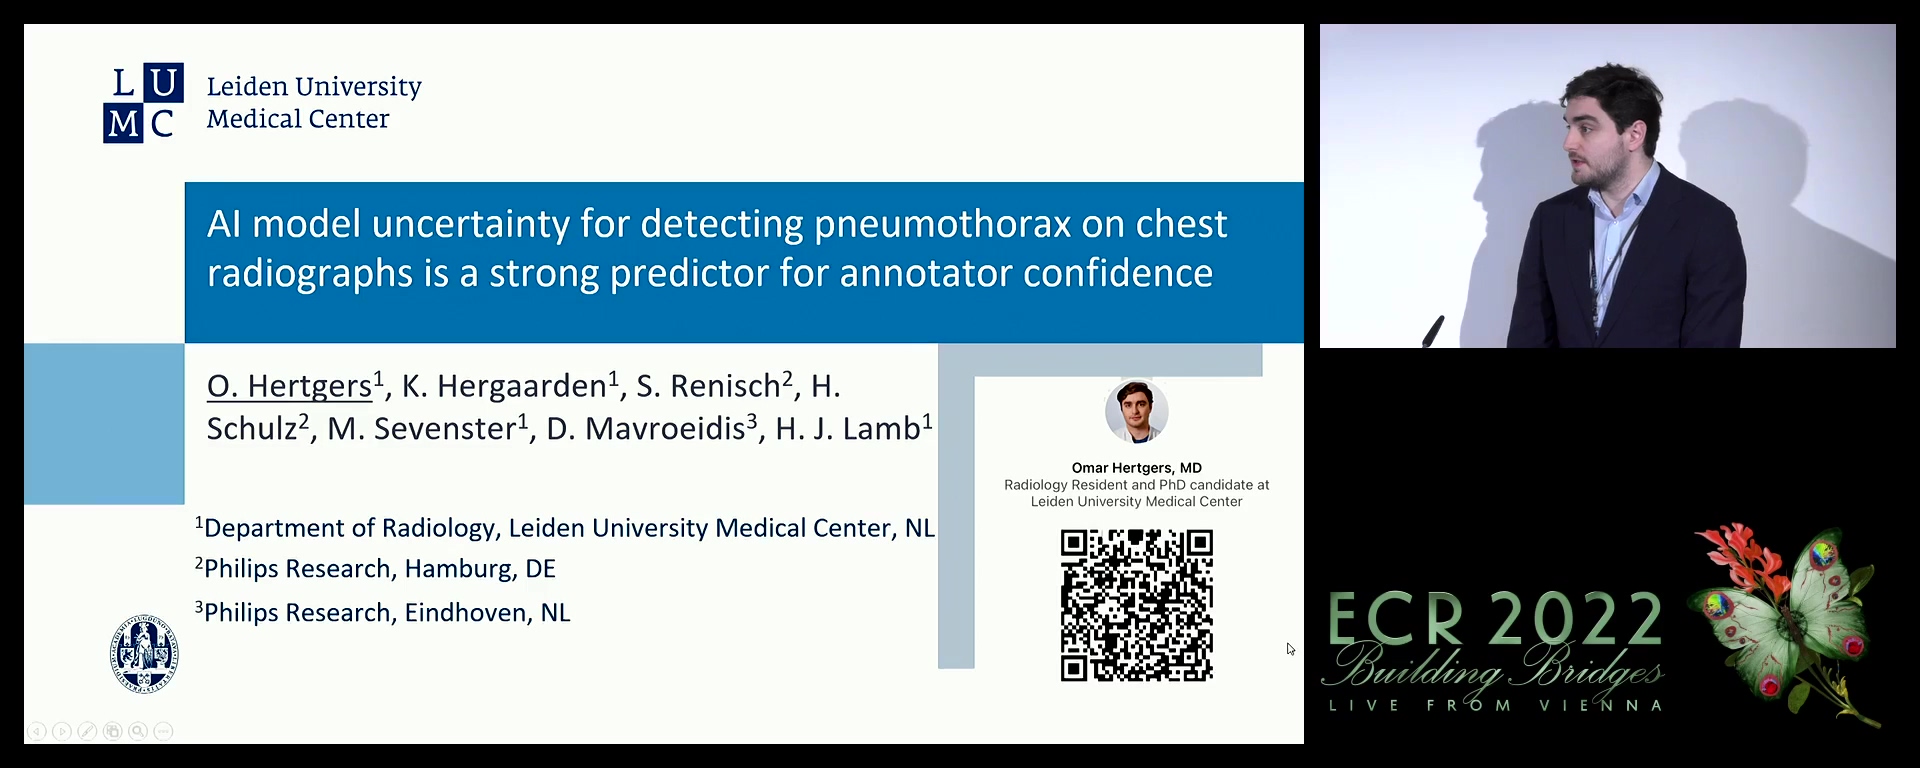 AI model uncertainty for detecting pneumothorax on chest radiographs is a strong predictor for annotator confidence